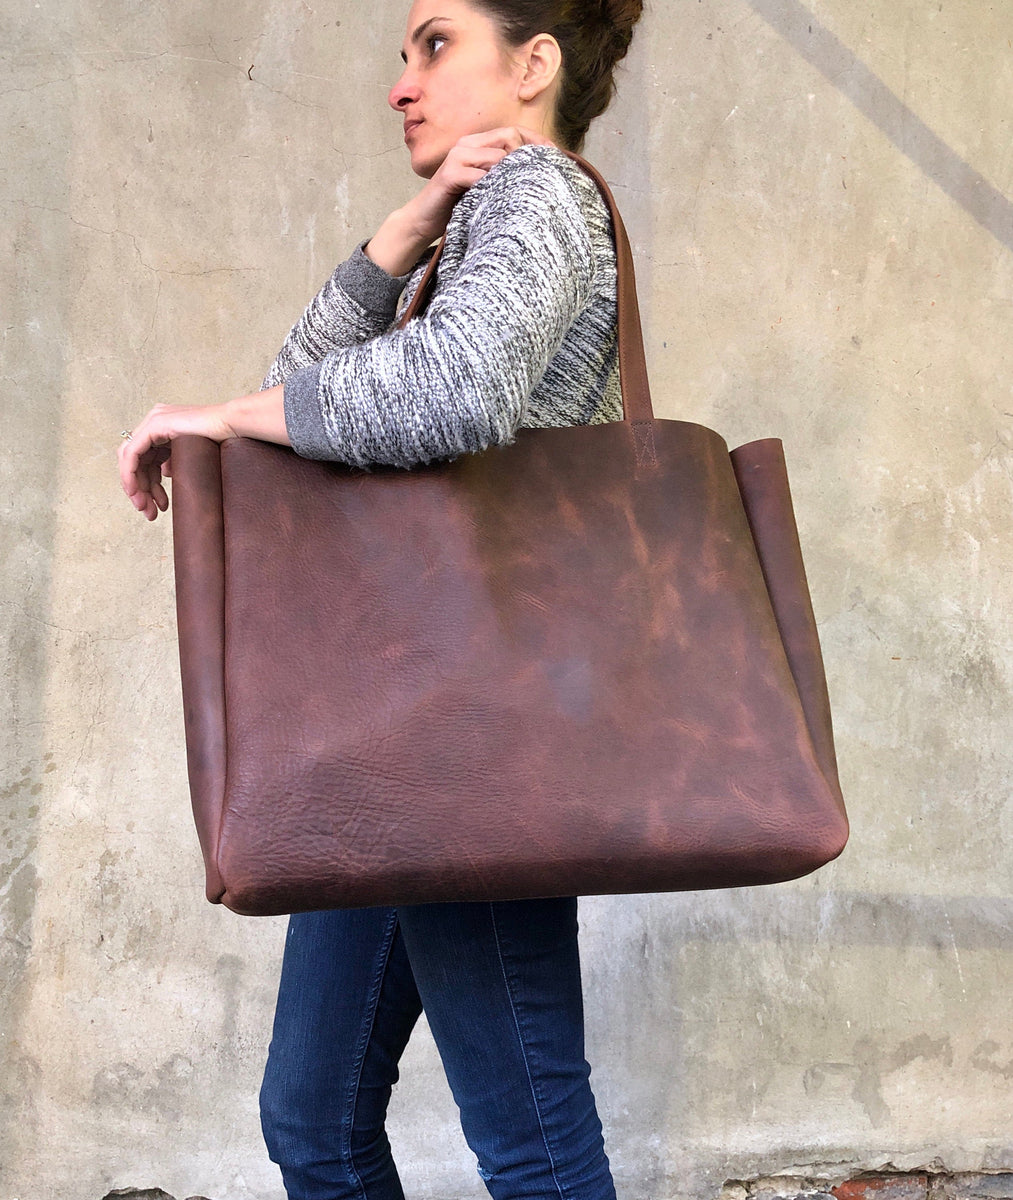 Brown Oversize Leather Tote Bag, Leather Purse, Shopping Bag, Big Shoulder Bag, Leather Everyday Tote, Dark Brown Extra Large Tote